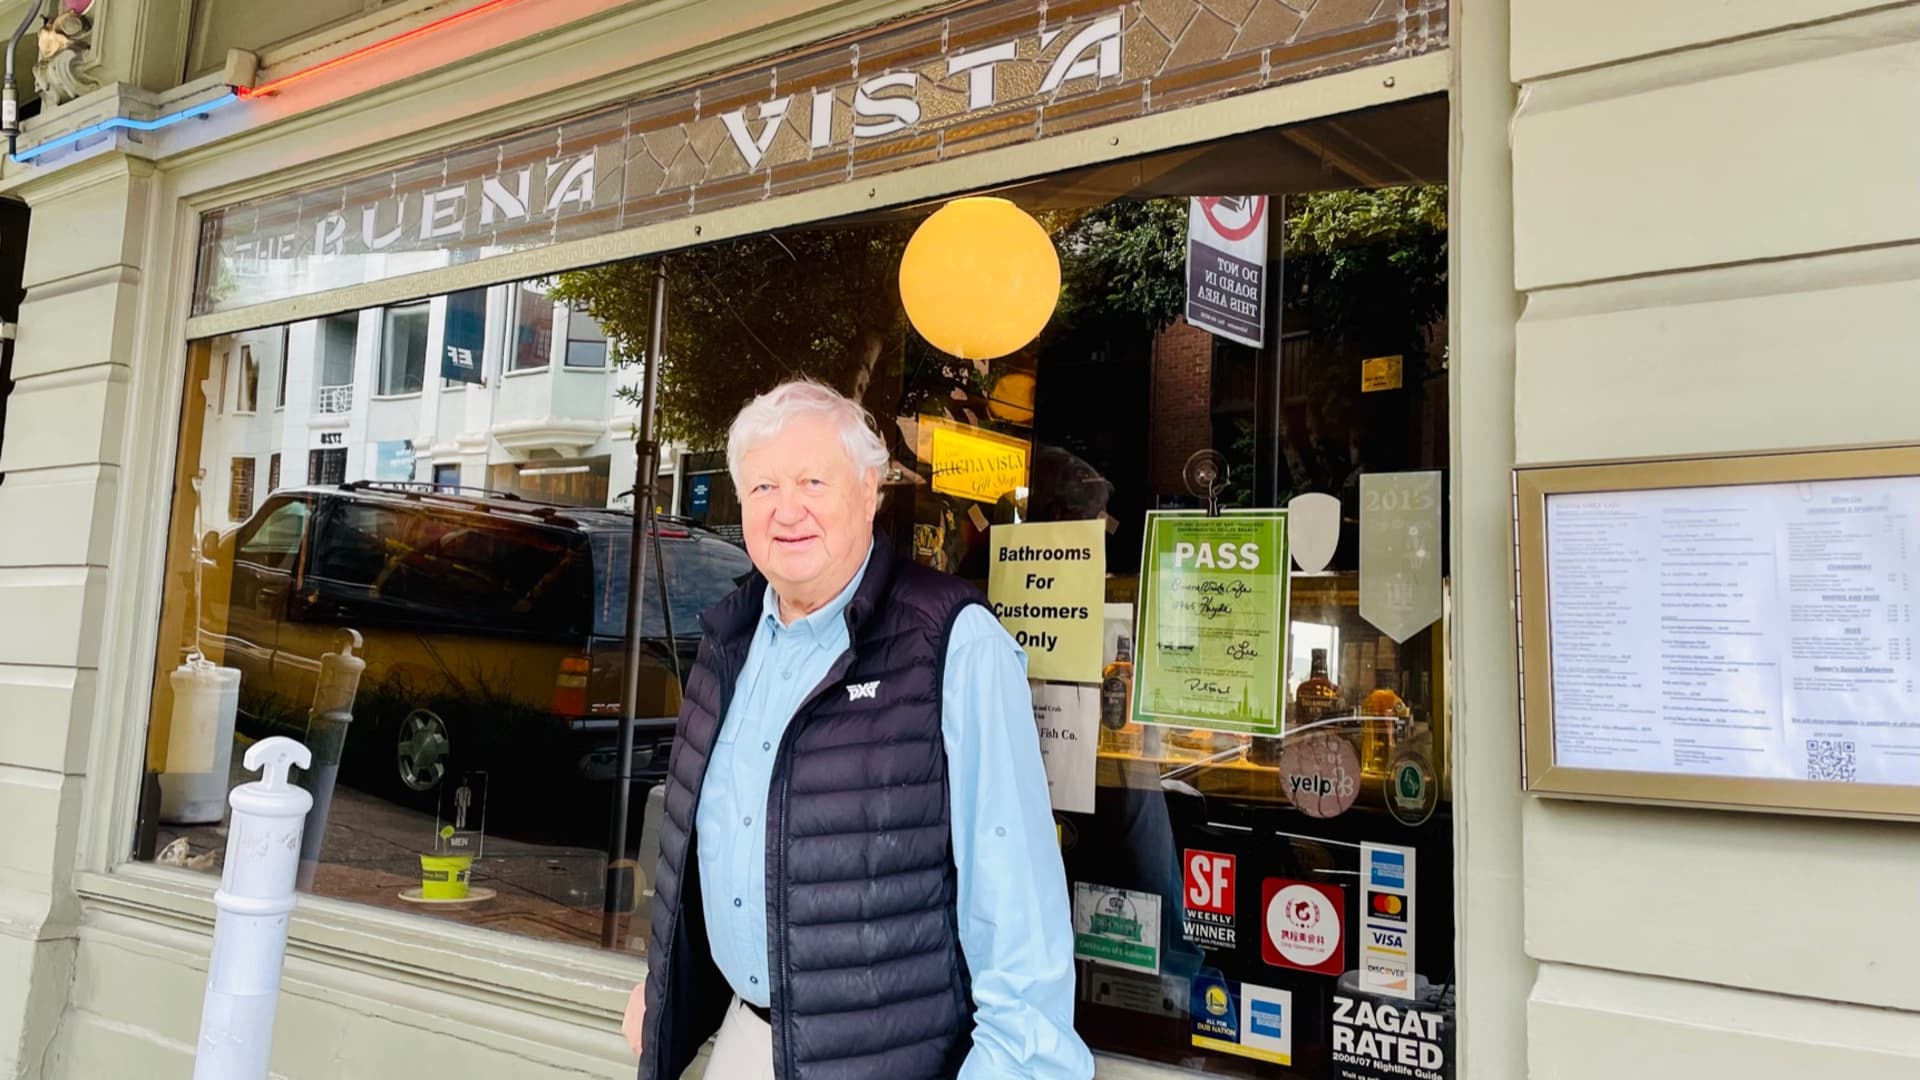 Robert Freeman is hopeful Congress will replenish the Restaurant Revitalization Fund as his restaurant continues to struggle in the pandemic.